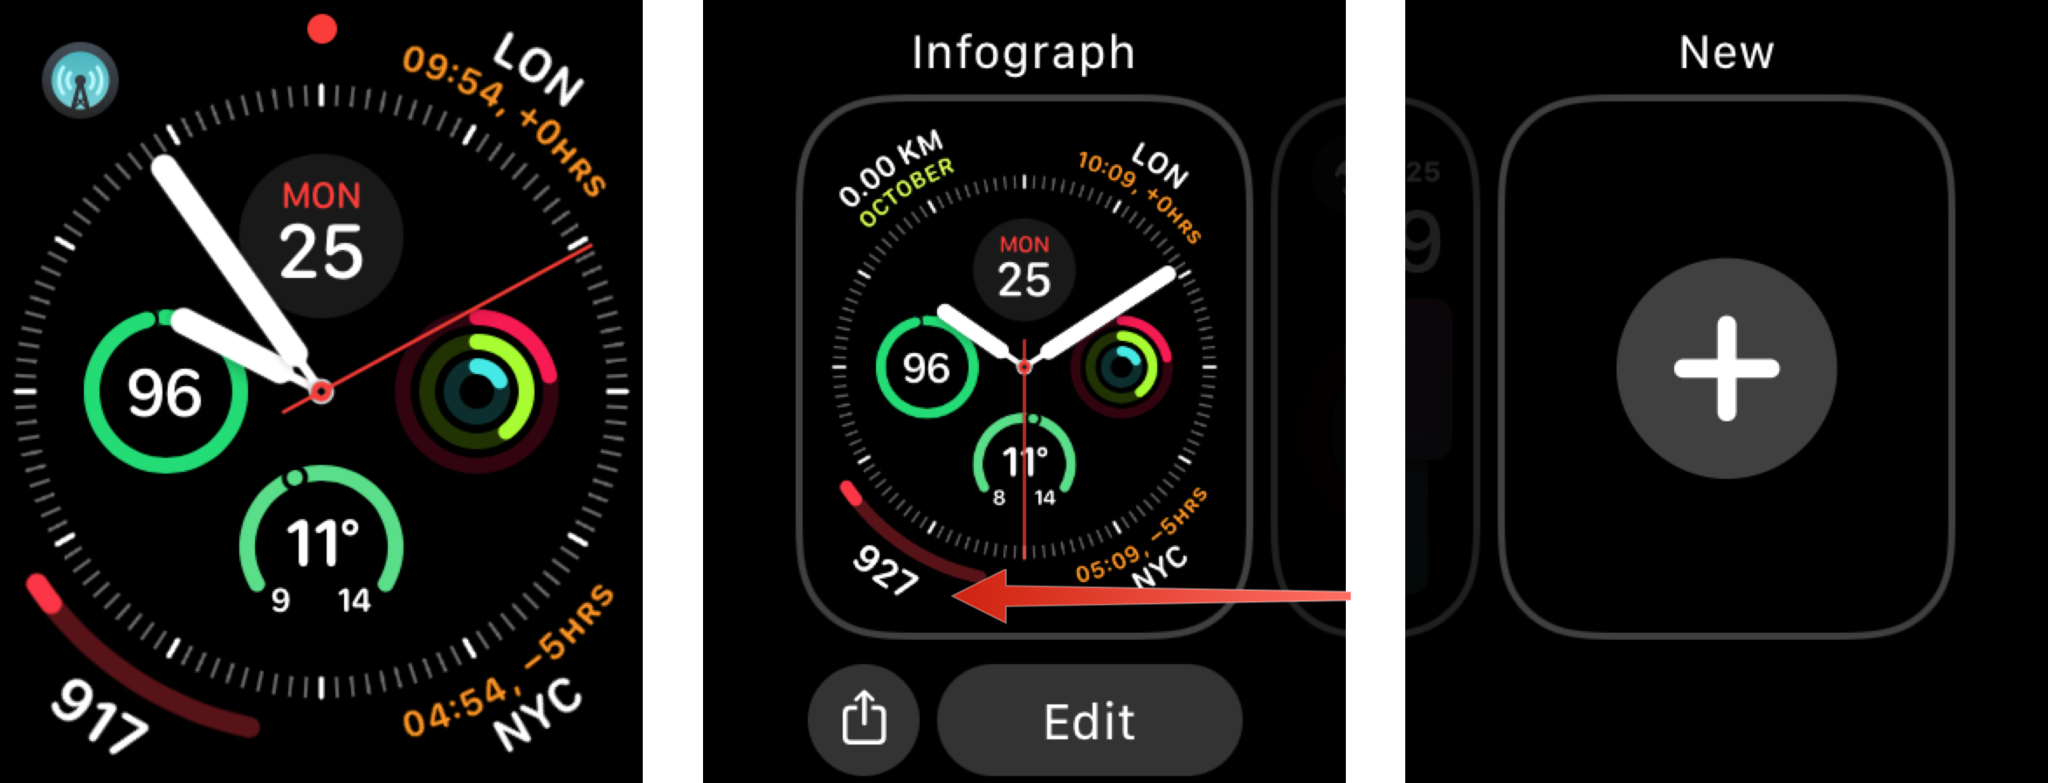 Add Watch Face via Apple Watch: Long press on the clock dial, swipe from right to left, tap New.